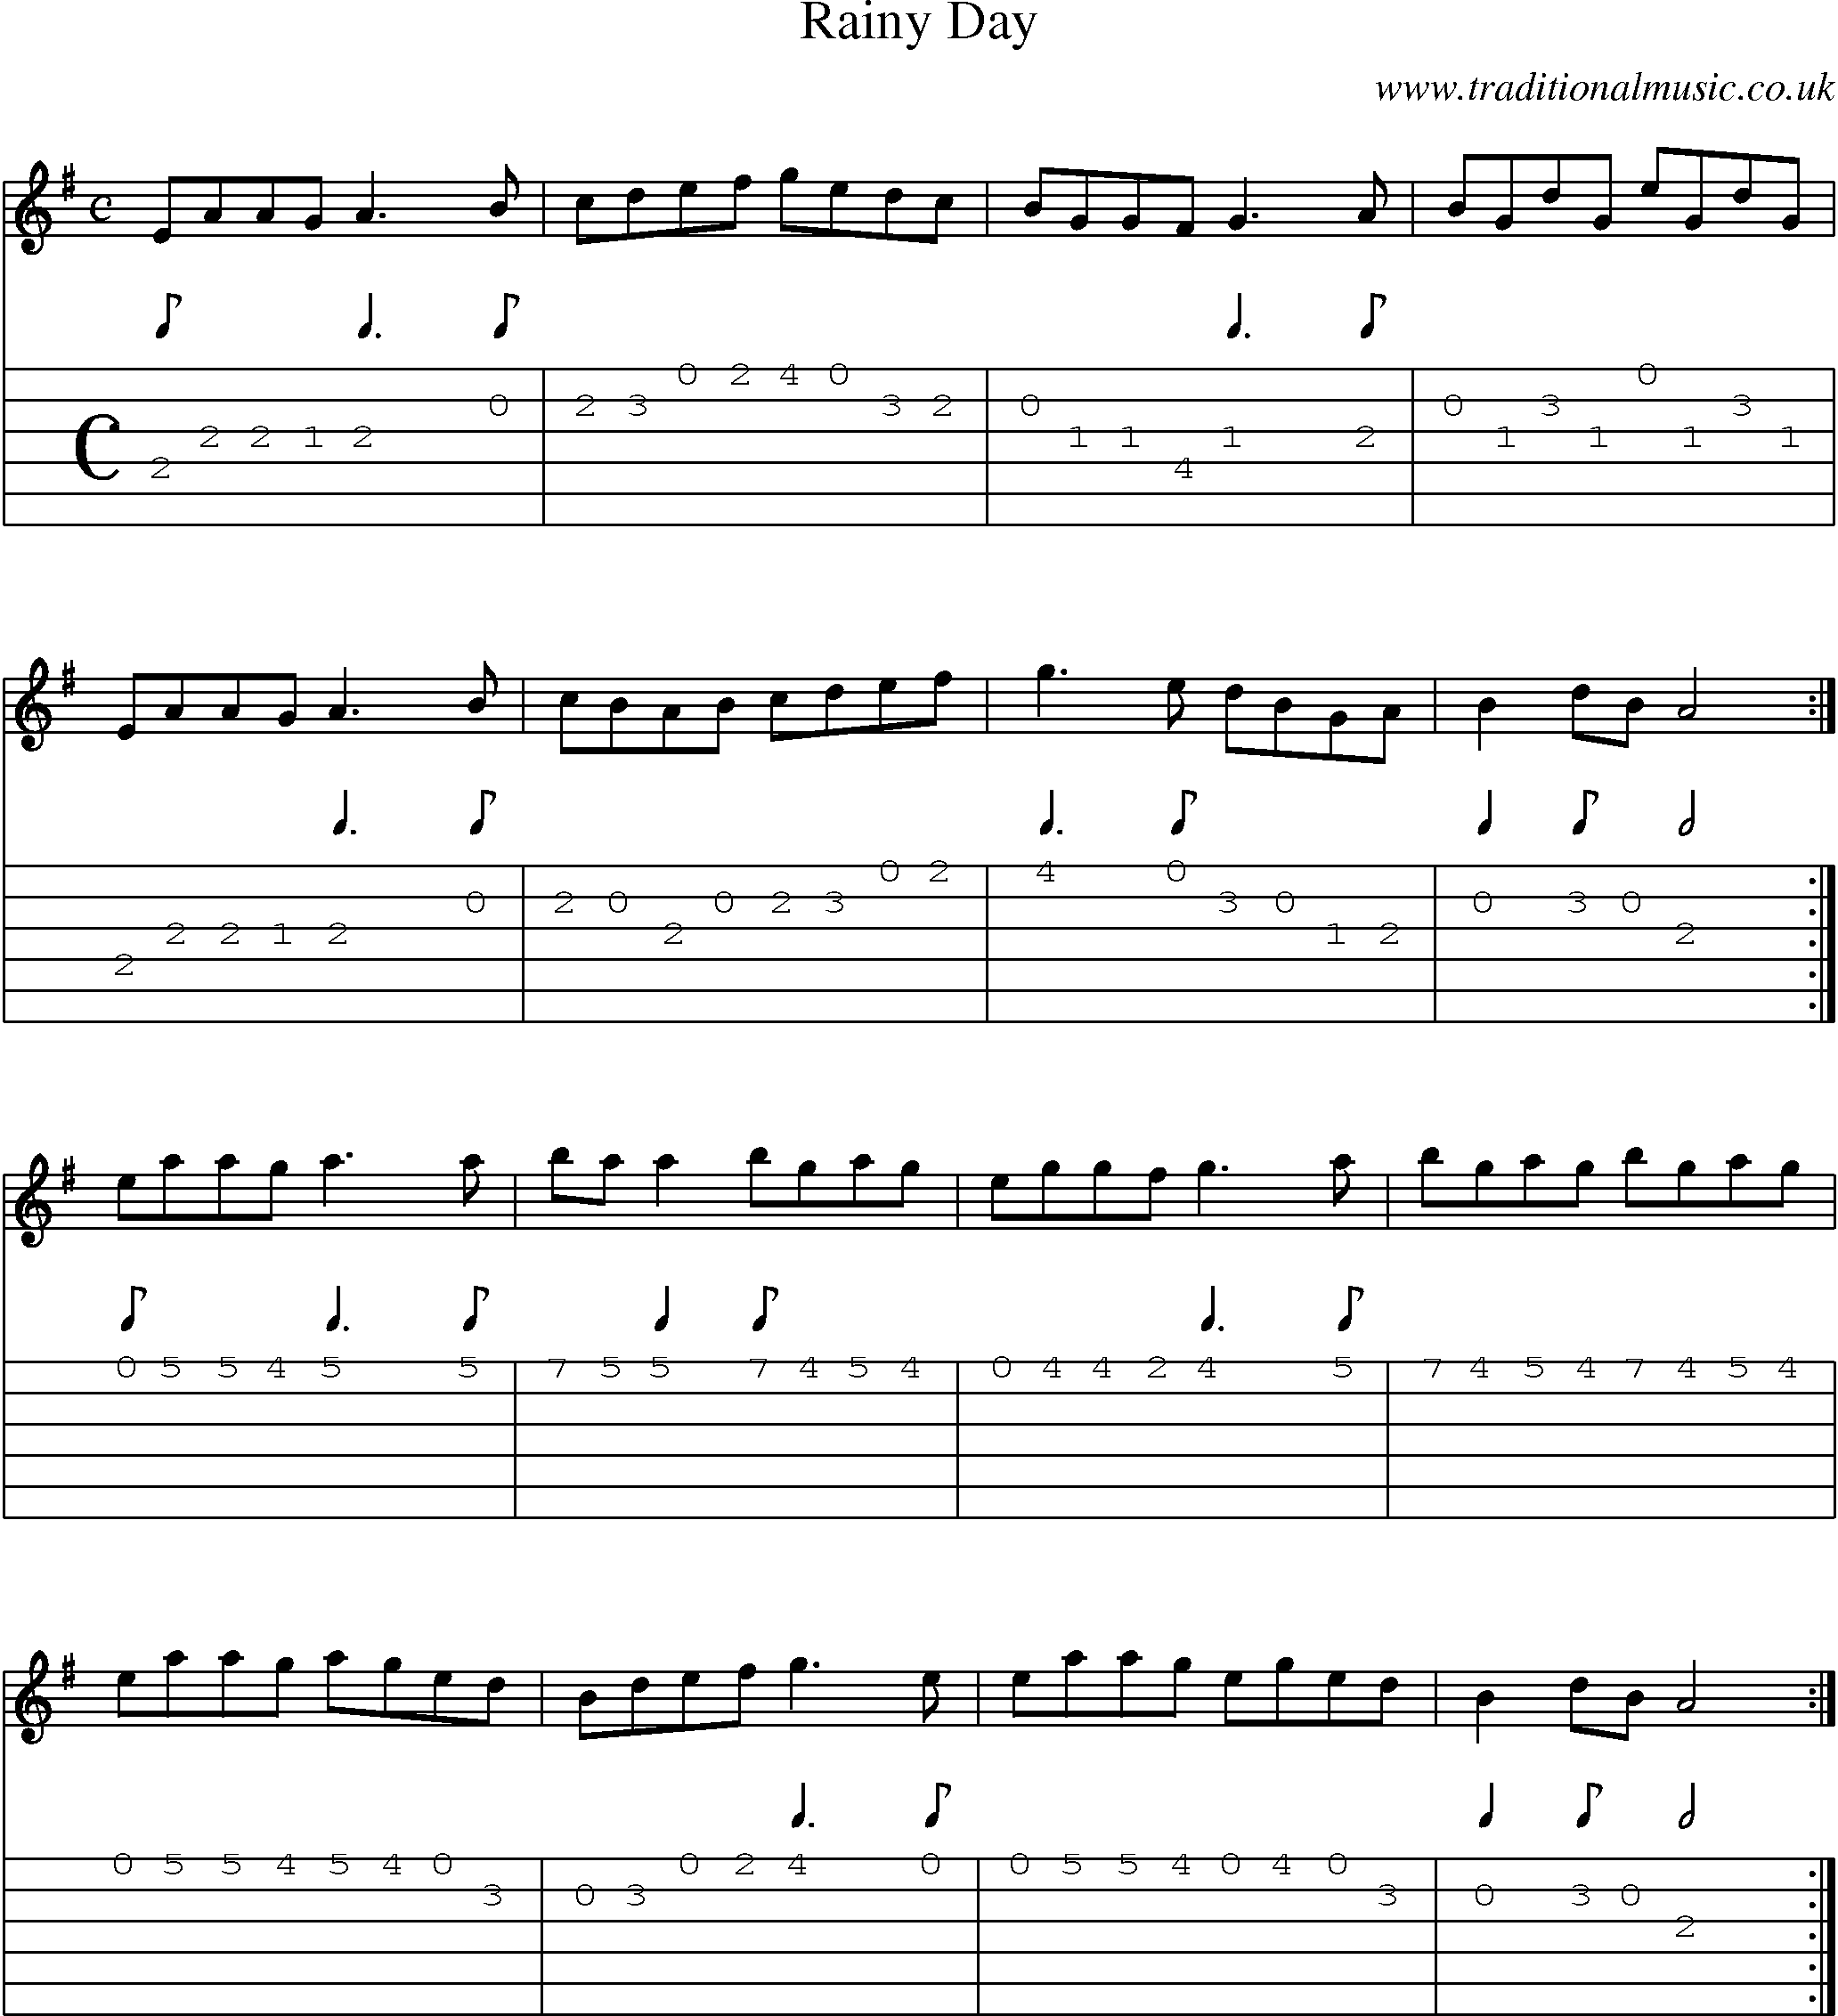 Music Score and Guitar Tabs for Rainy Day